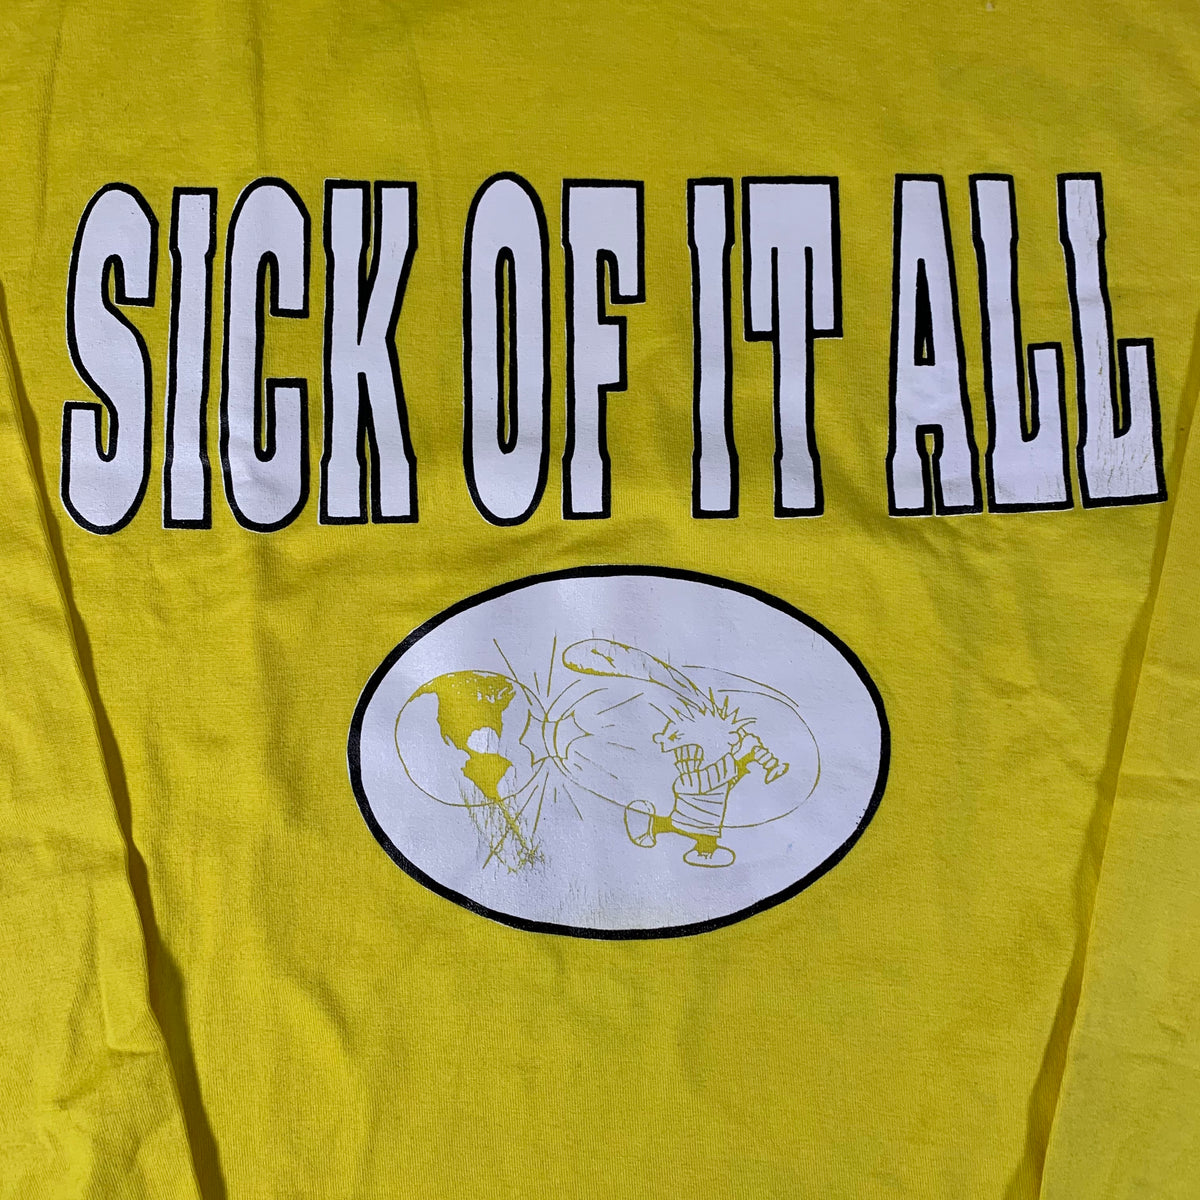 Vintage Sick Of It All &quot;You Can&#39;t Change The World&quot; Long Sleeve Shirt